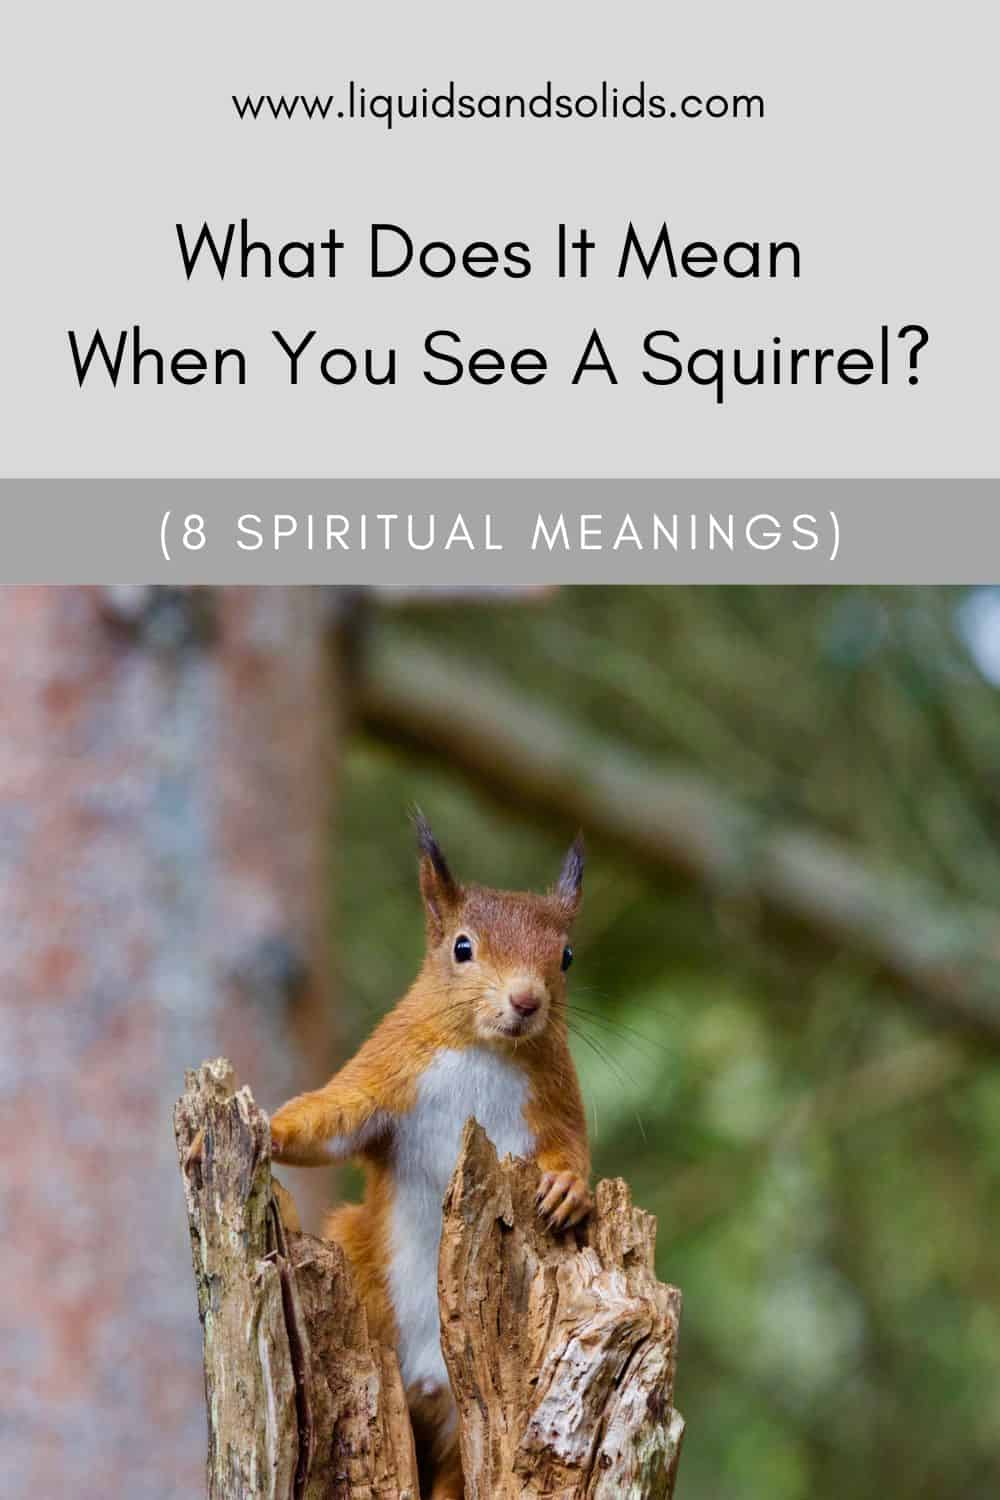 What Does It Mean When You See A Squirrel? (8 Spiritual Meanings)